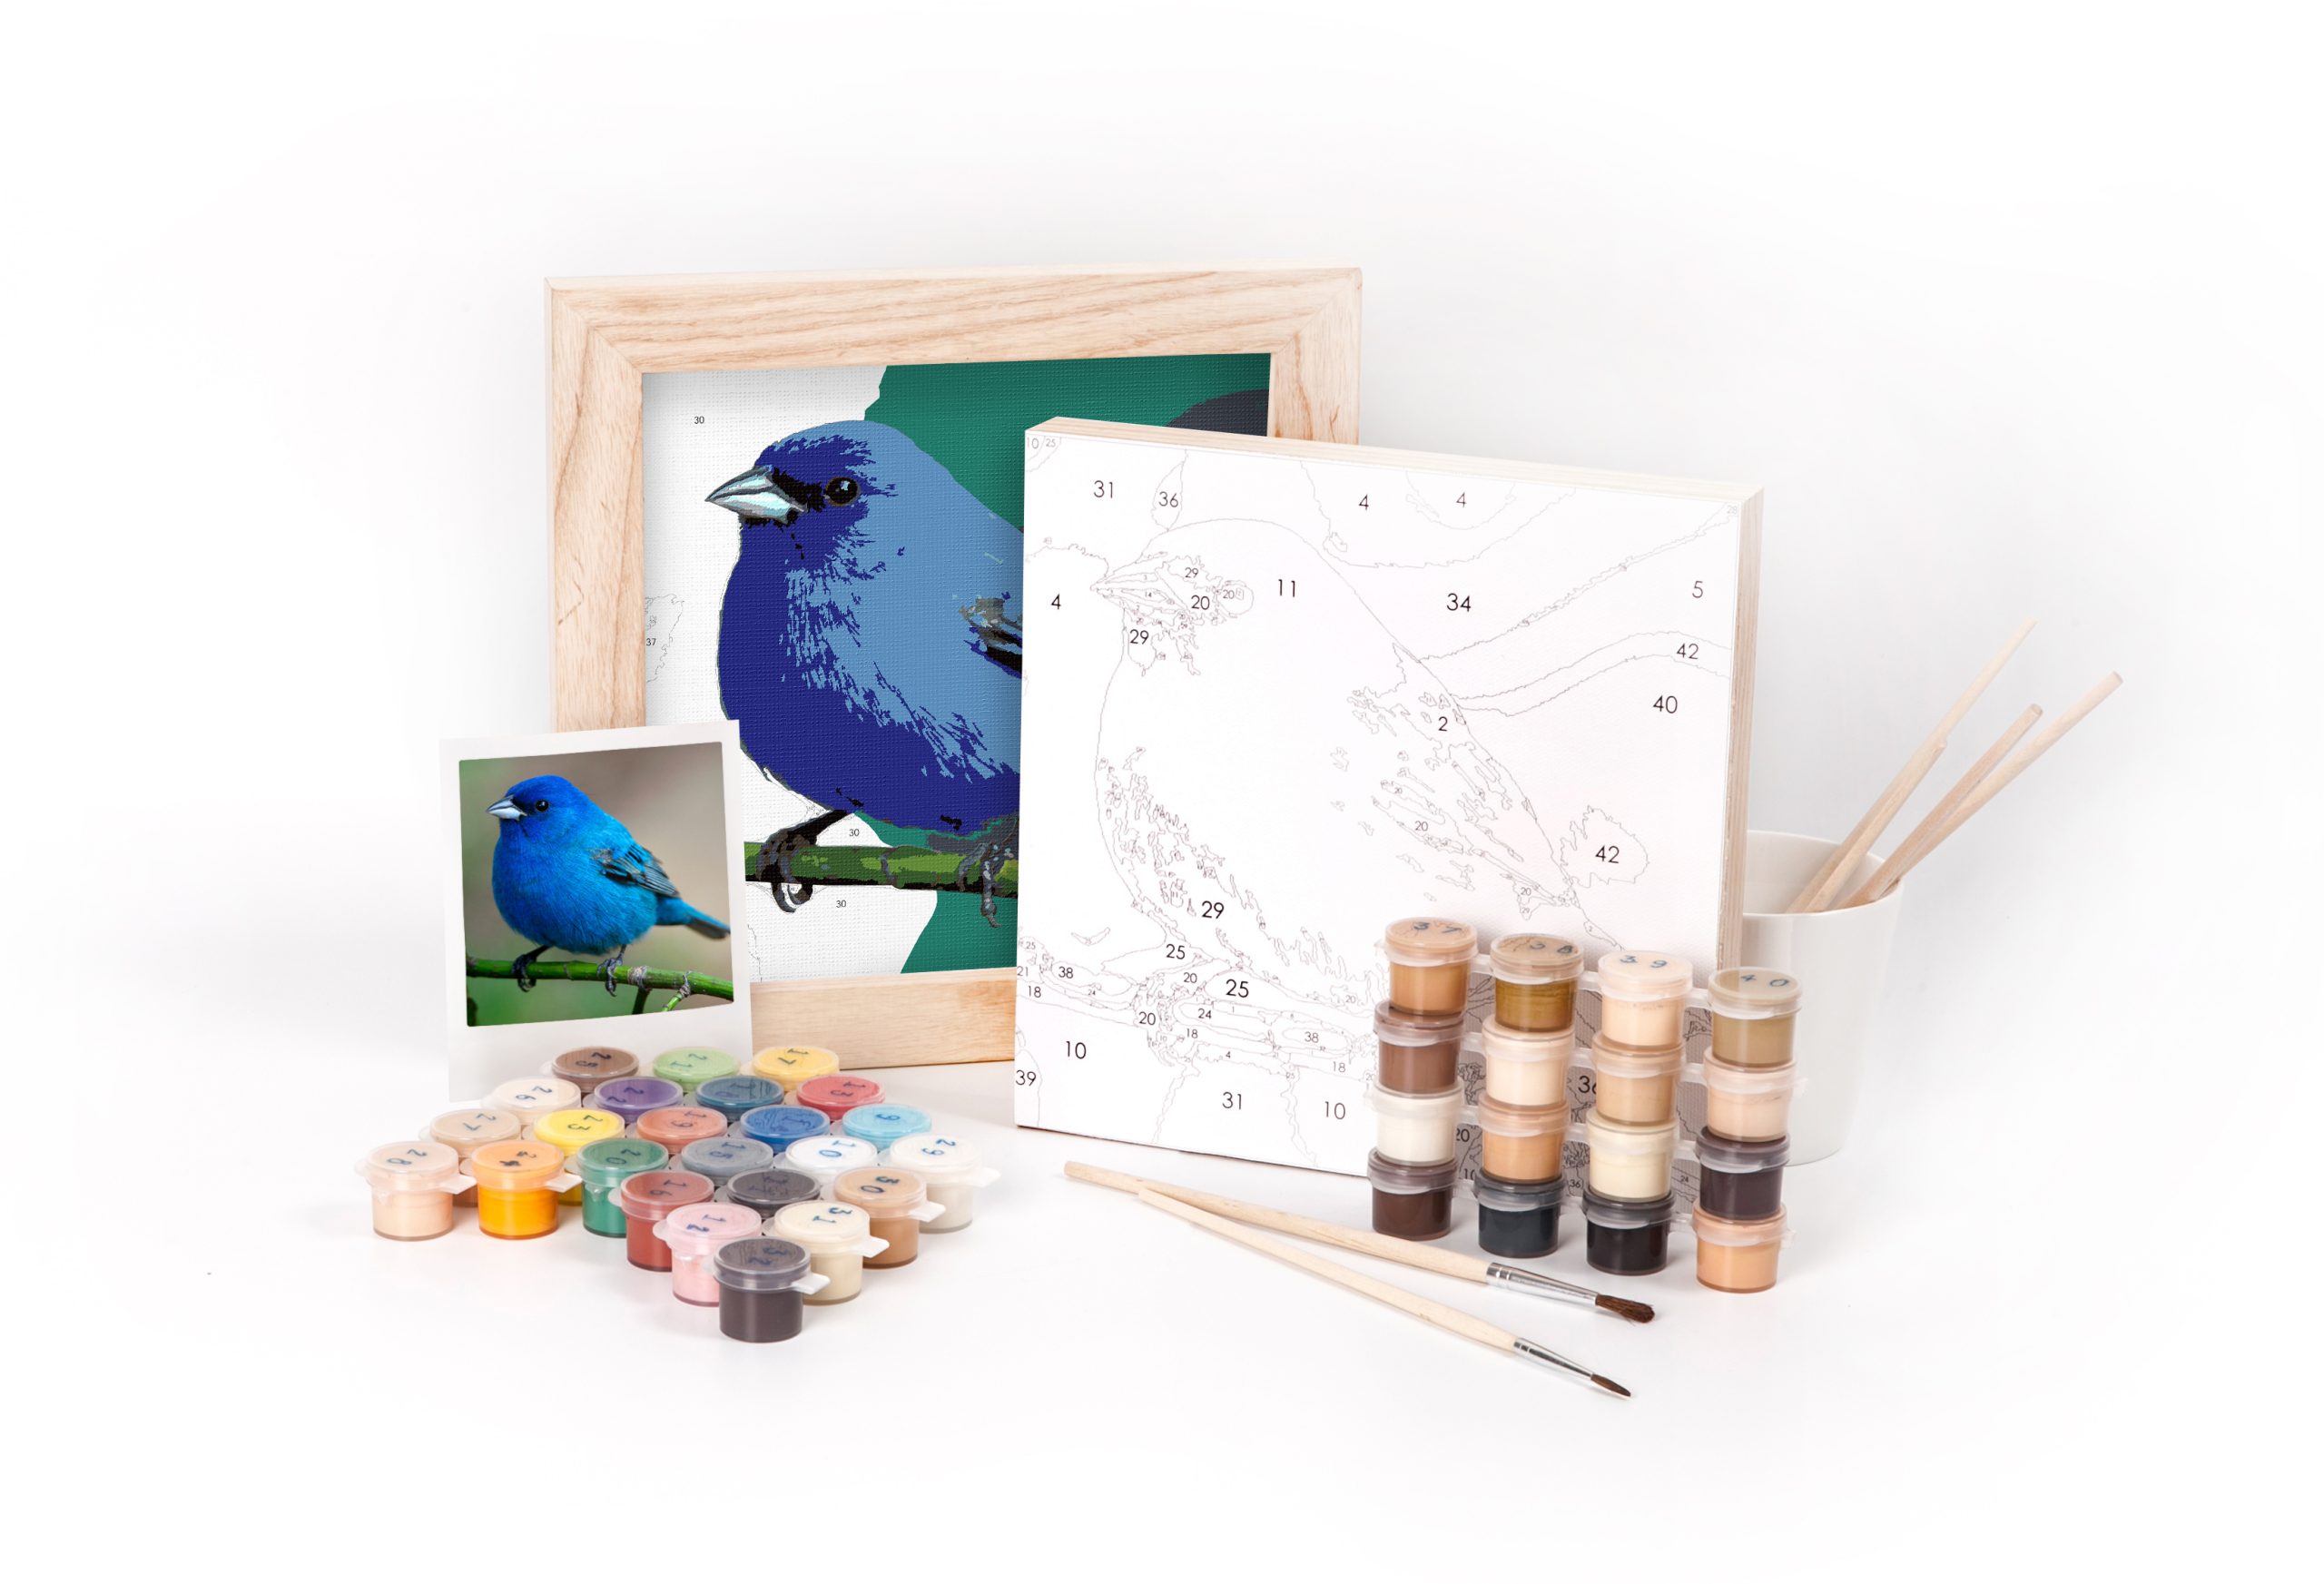 Paint-by-Number Kit - Mini - Sparrow - Gift & Gather